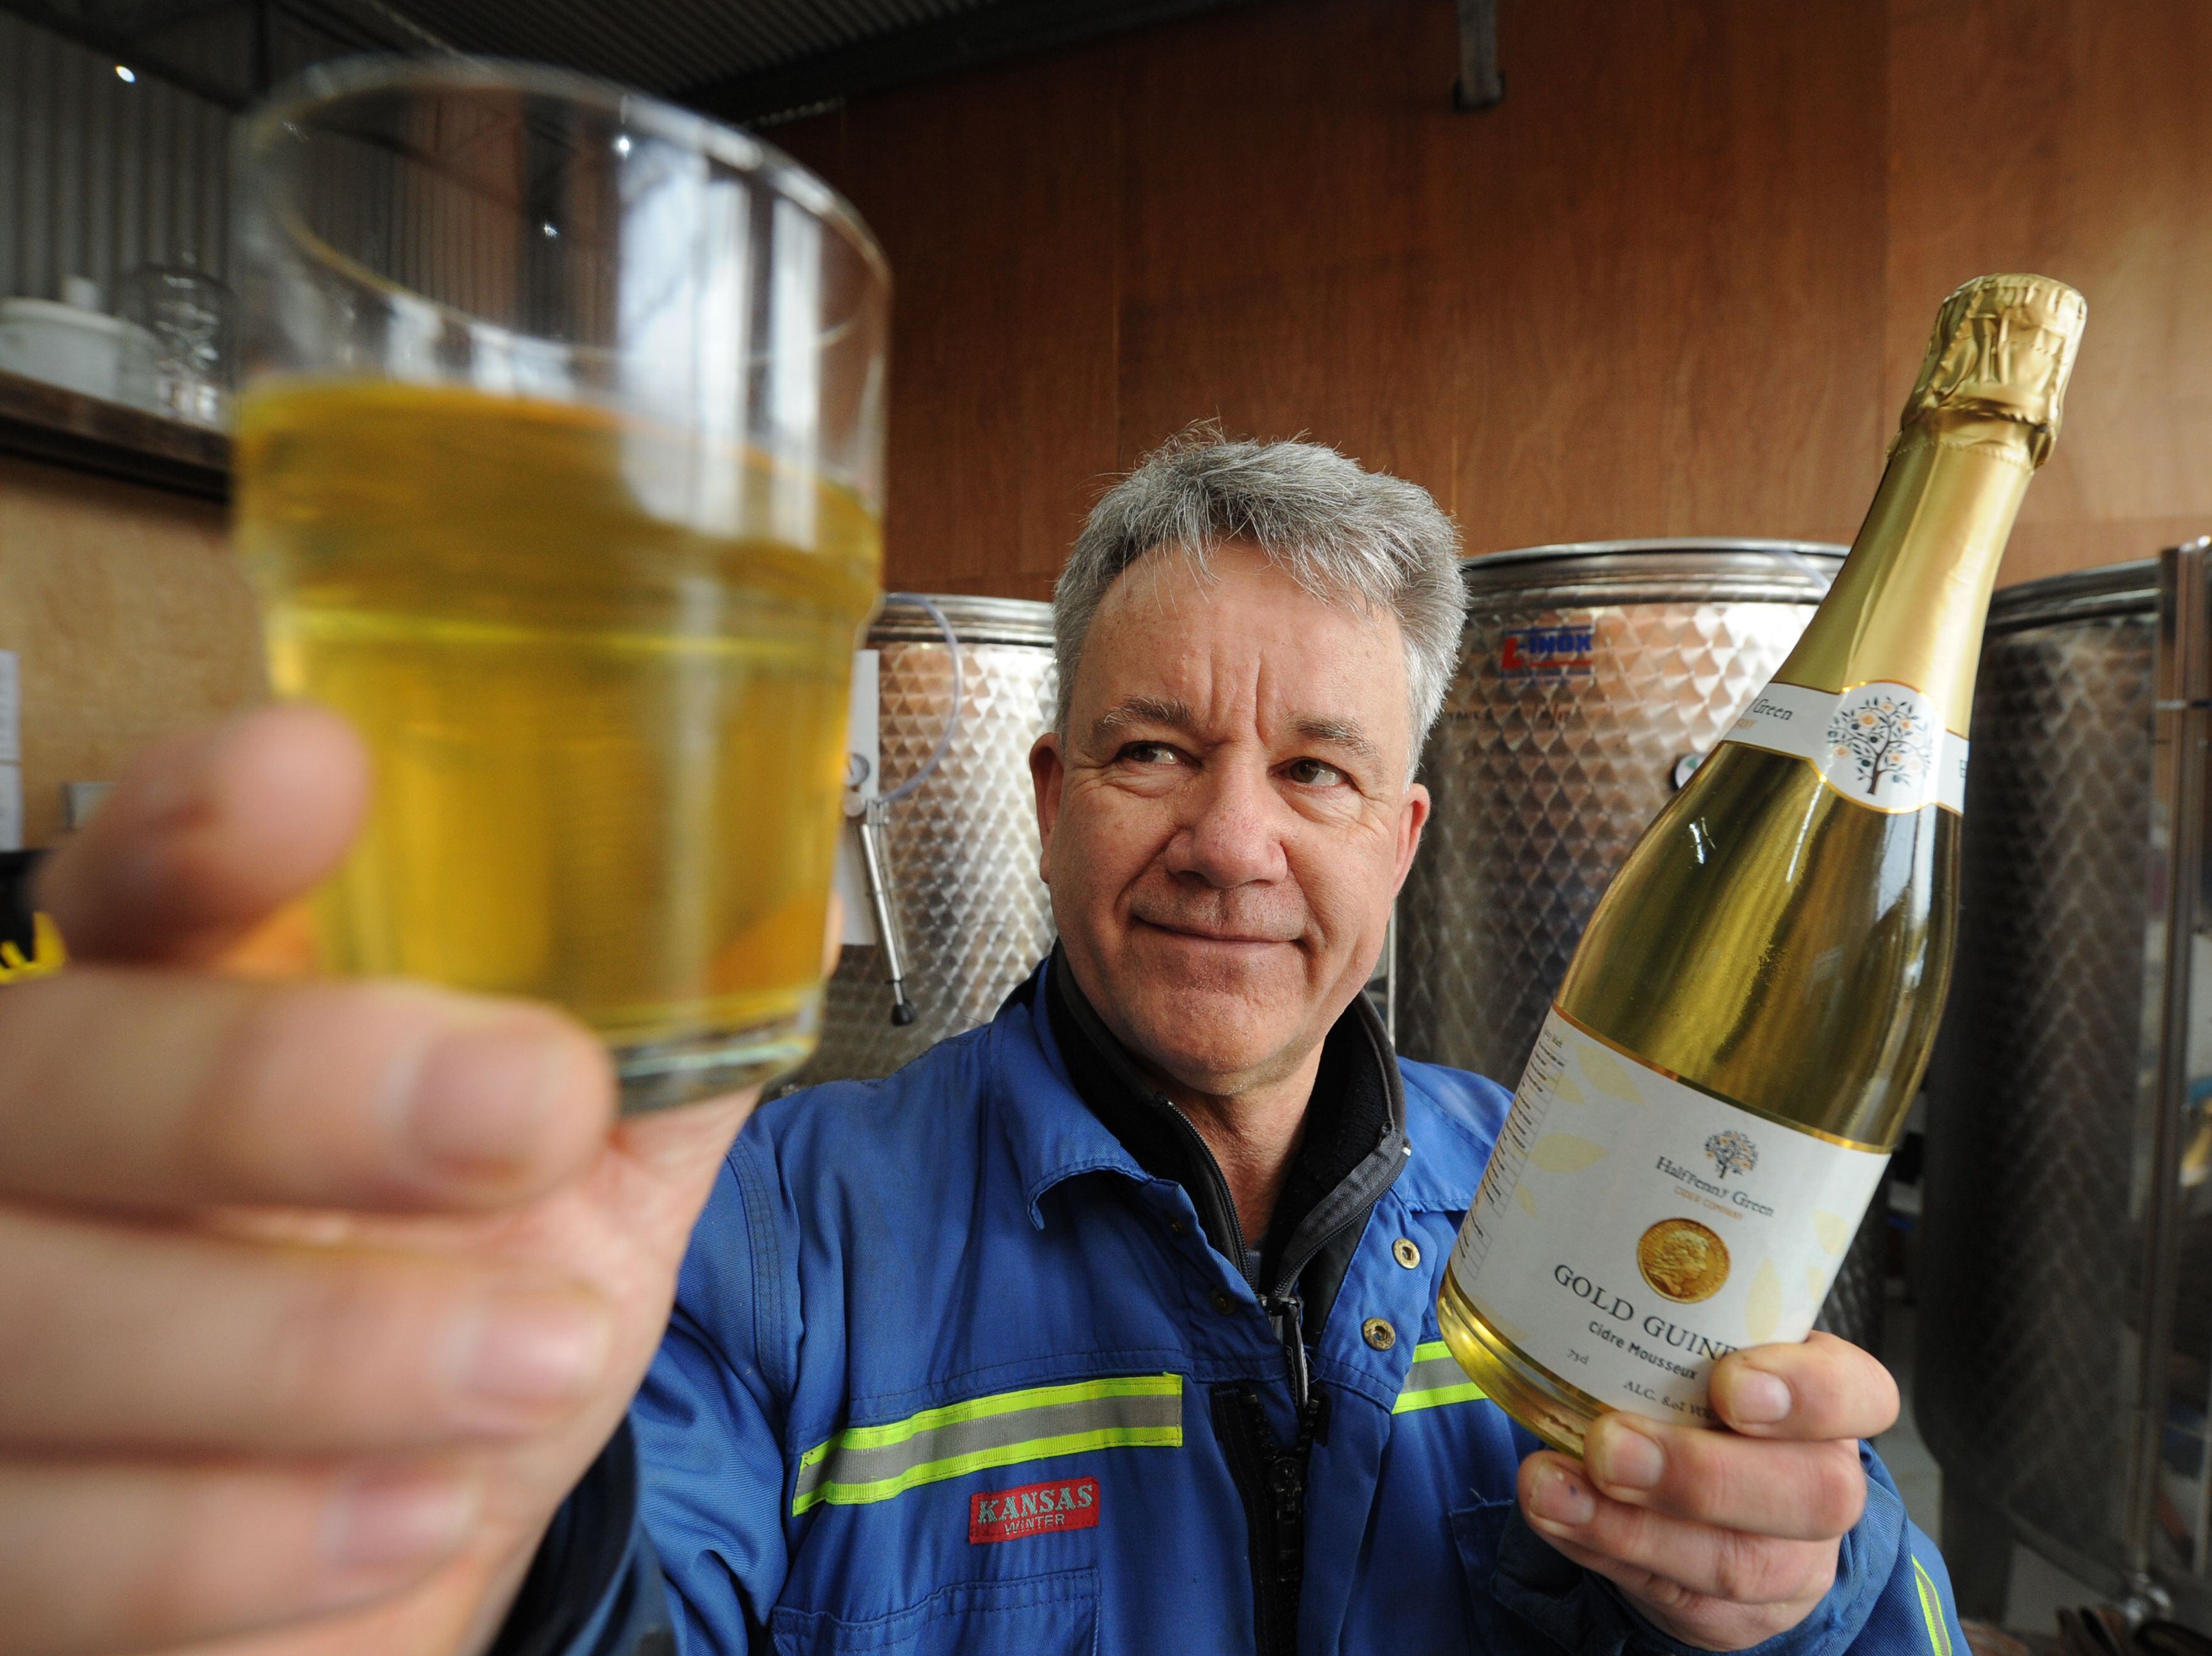 Founder of cider company dies at the age of 65 following cancer battle 